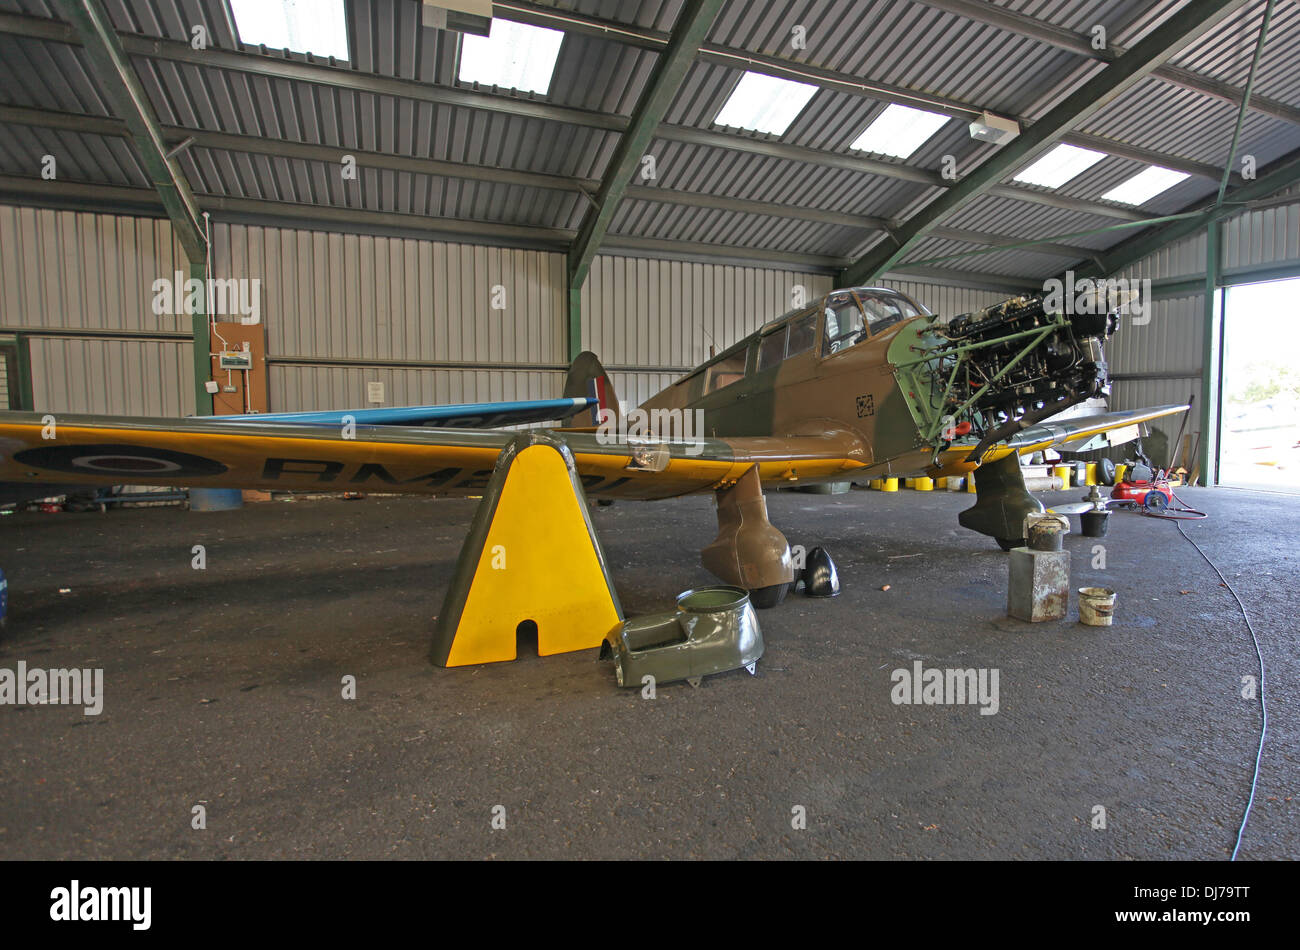 Proctor light aircraft in a hangar for engine maintenance Stock Photo